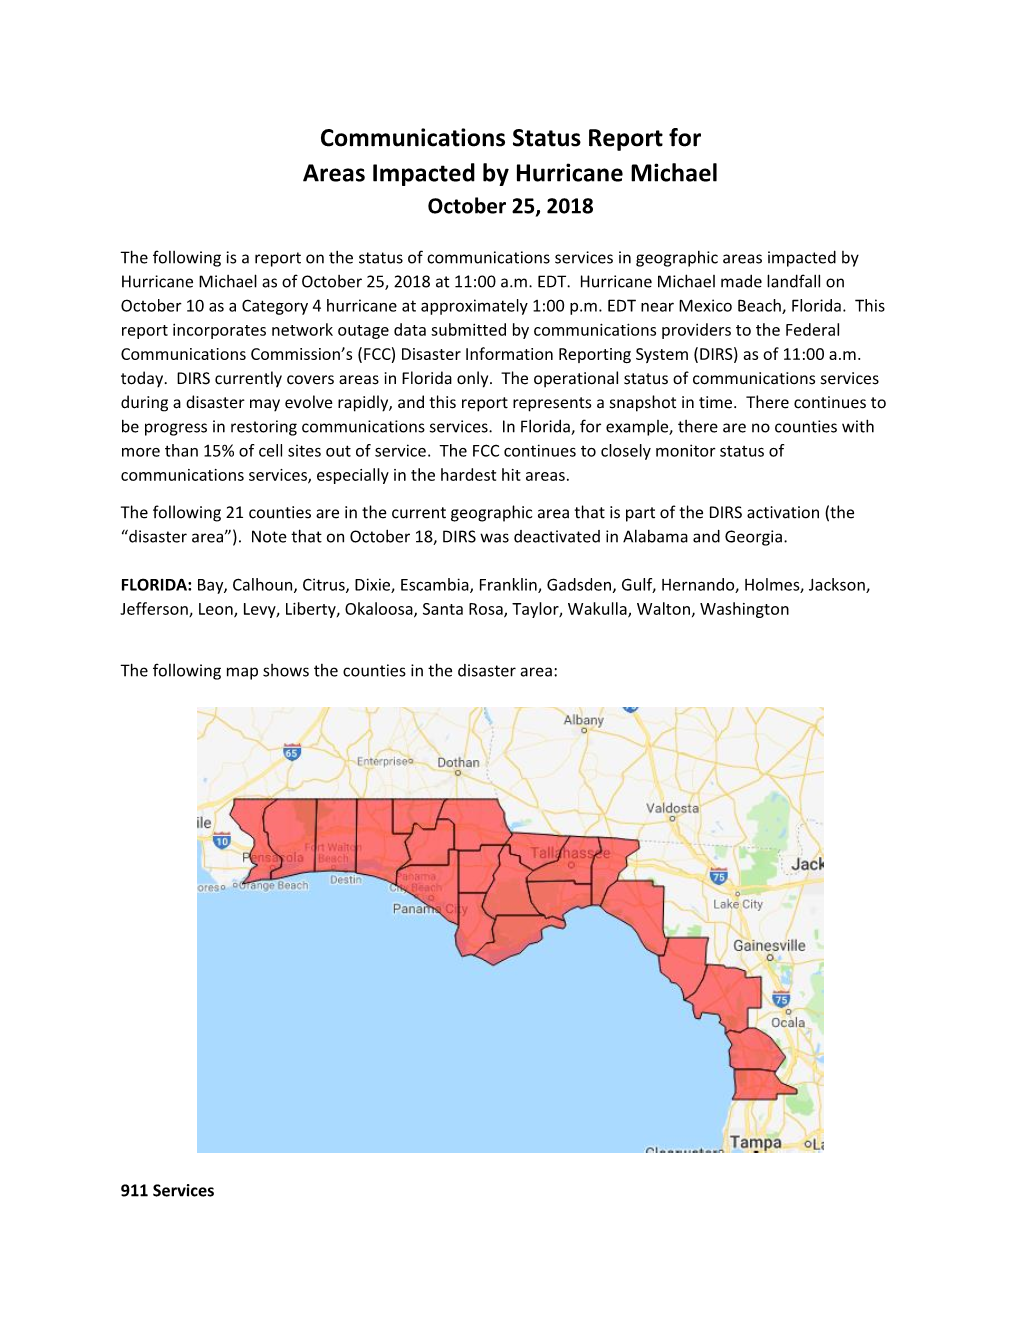 Communications Status Report for Areas Impacted by Hurricane Michael October 25, 2018